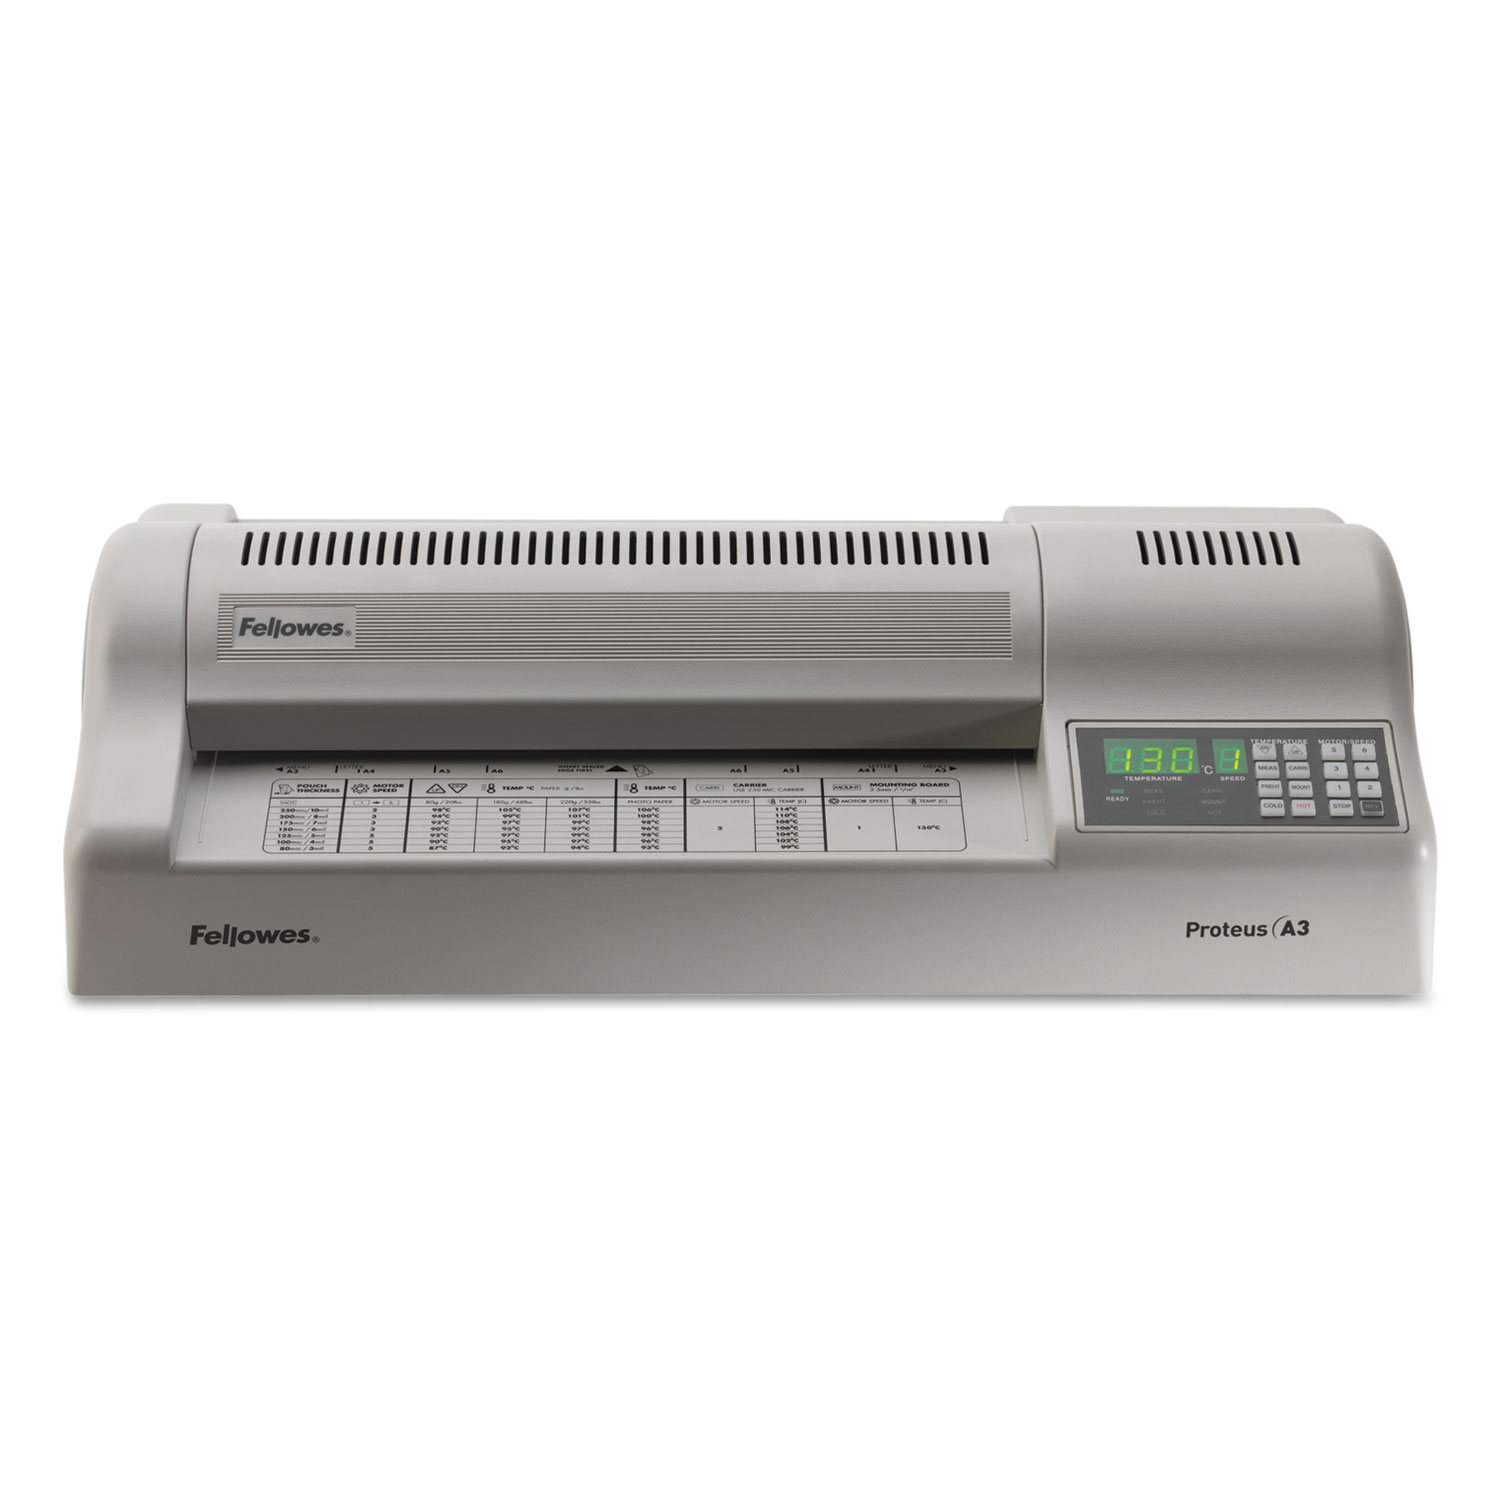  Fellowes 5709501 Proteus 125 Laminator, 12 Max Document Width, 10 mil Max Document Thickness (FEL5709501) 